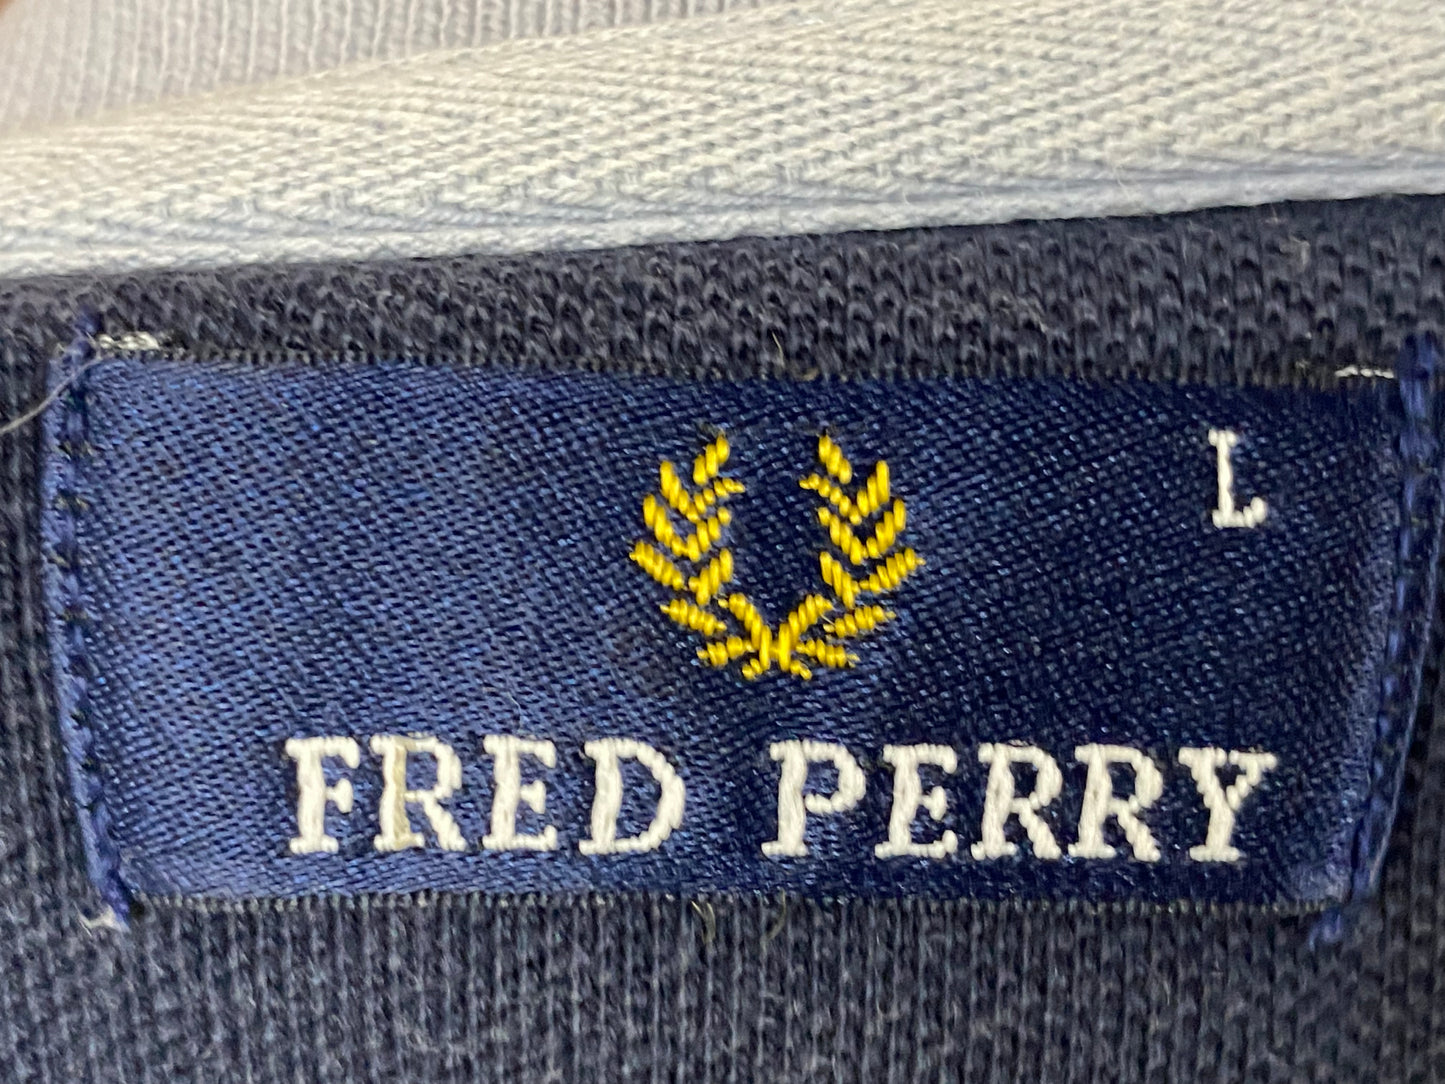 Fred Perry Big Logo Vintage Men's Polo Shirt - Large Blue Cotton